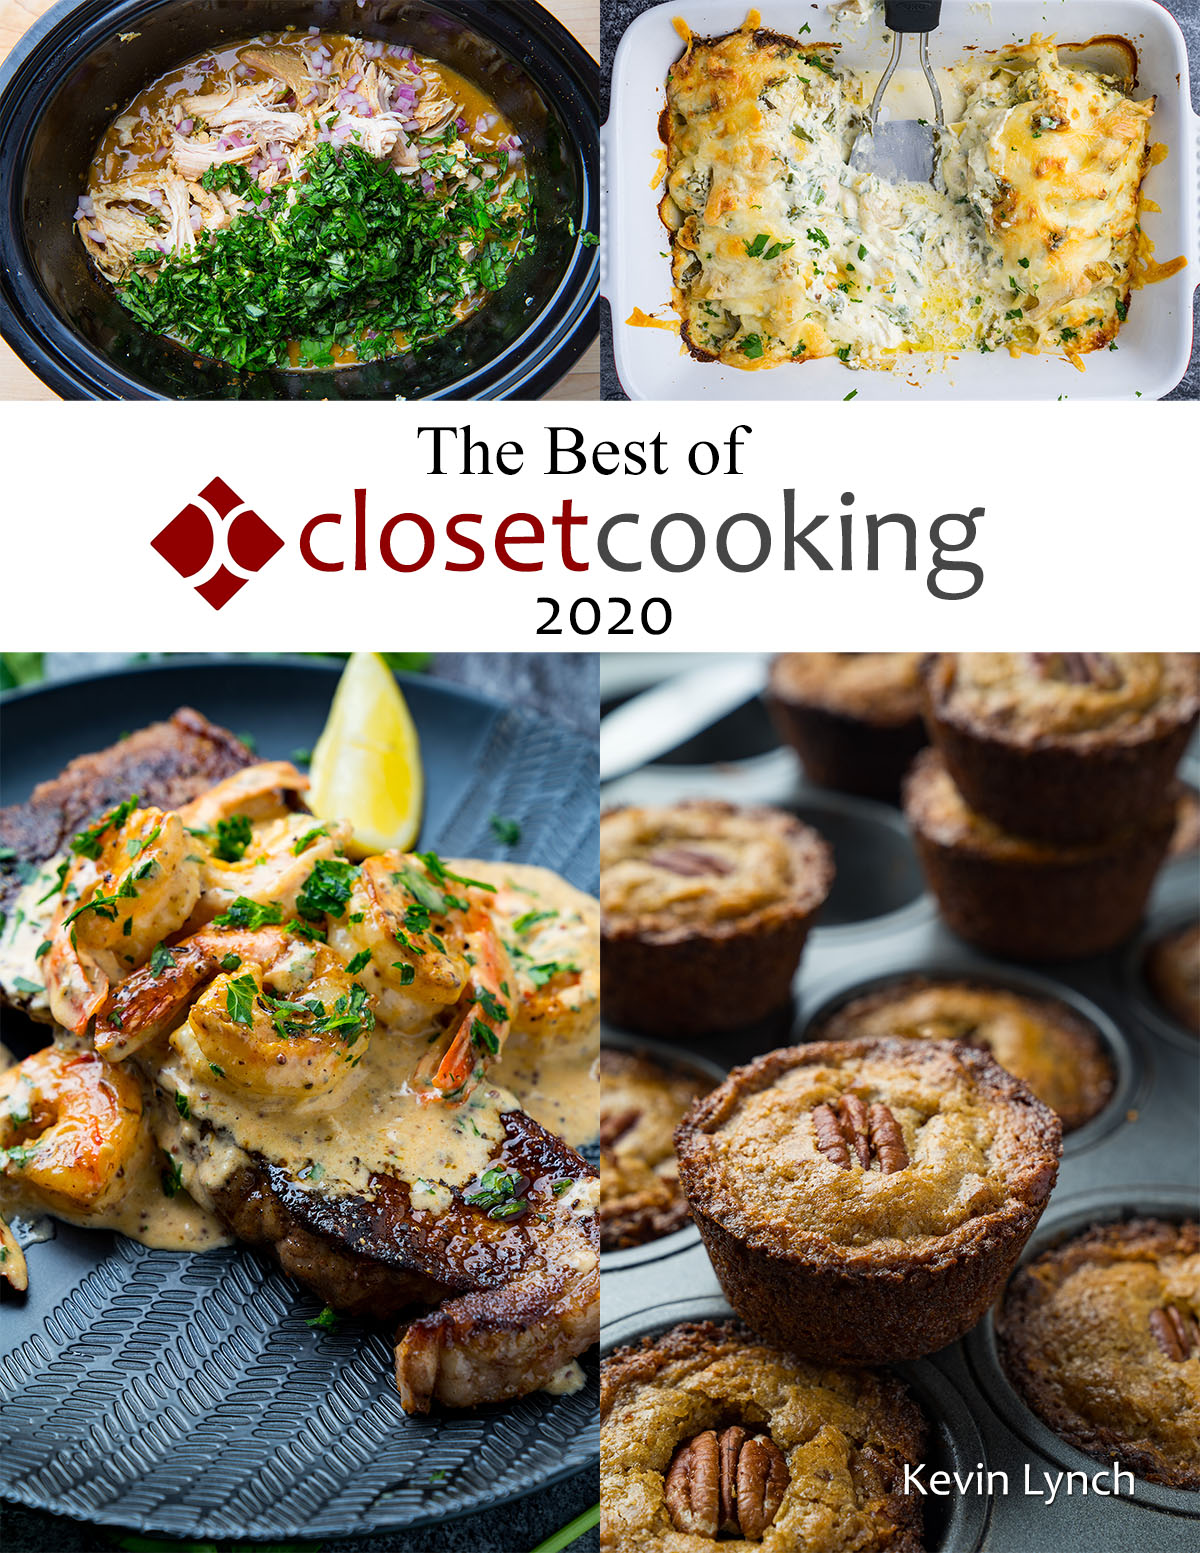 The Best of Closet Cooking 2020 Cookbook - Get your copy now!